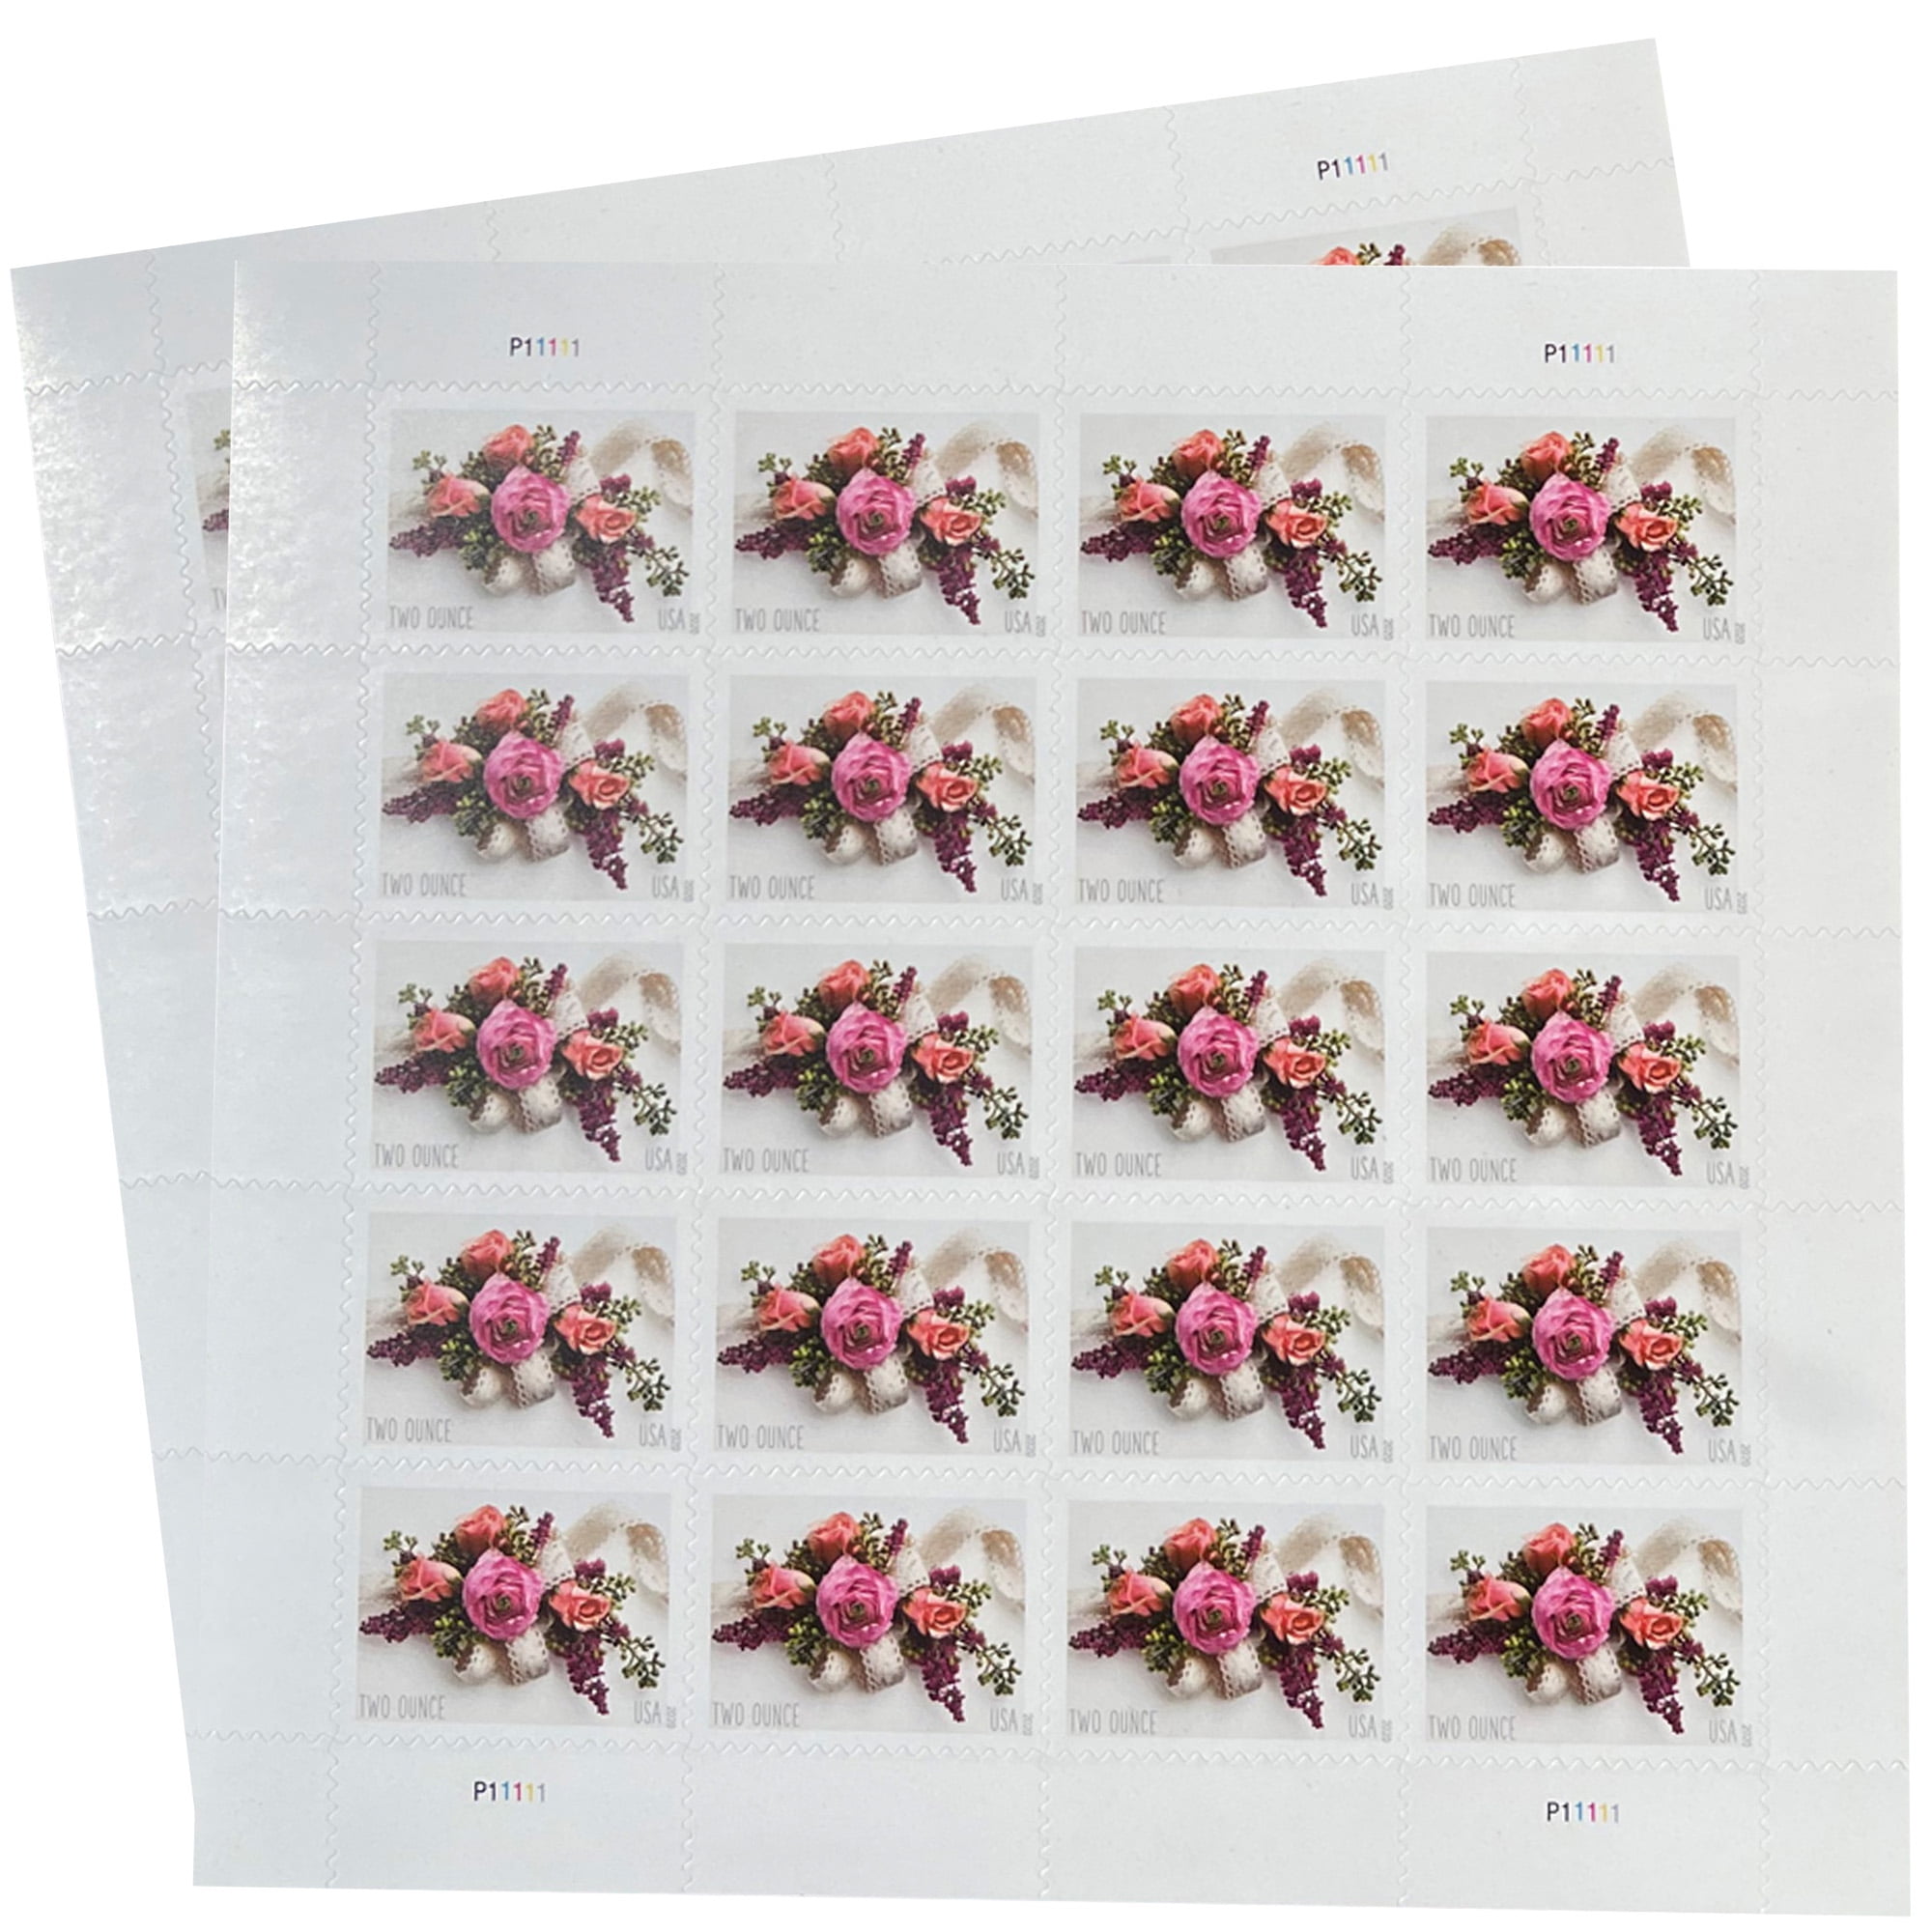 Love 2021 USPS Forever Postage Stamp 1 Sheet of 20 US First Class Postal Valentine Heart Wedding Celebration Anniversary Romance Party (20 Stamps)